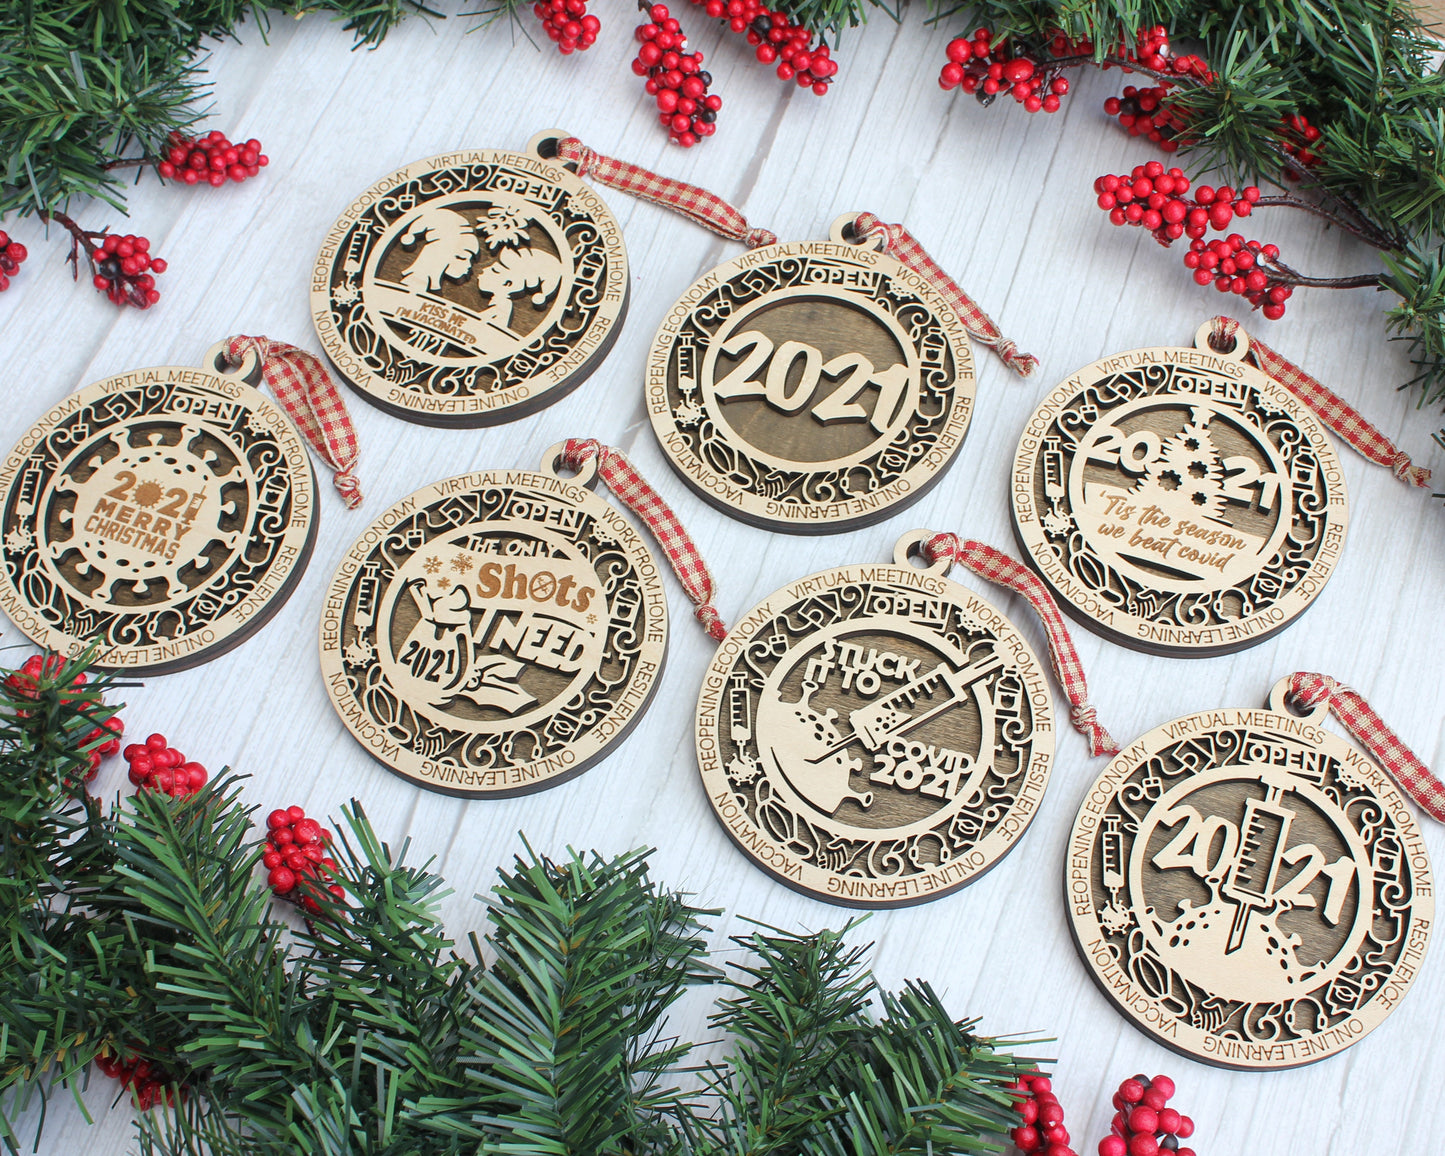 2021 Themed Christmas Ornament Bundle - 15 Designs - SVG File Download - Sized for Glowforge